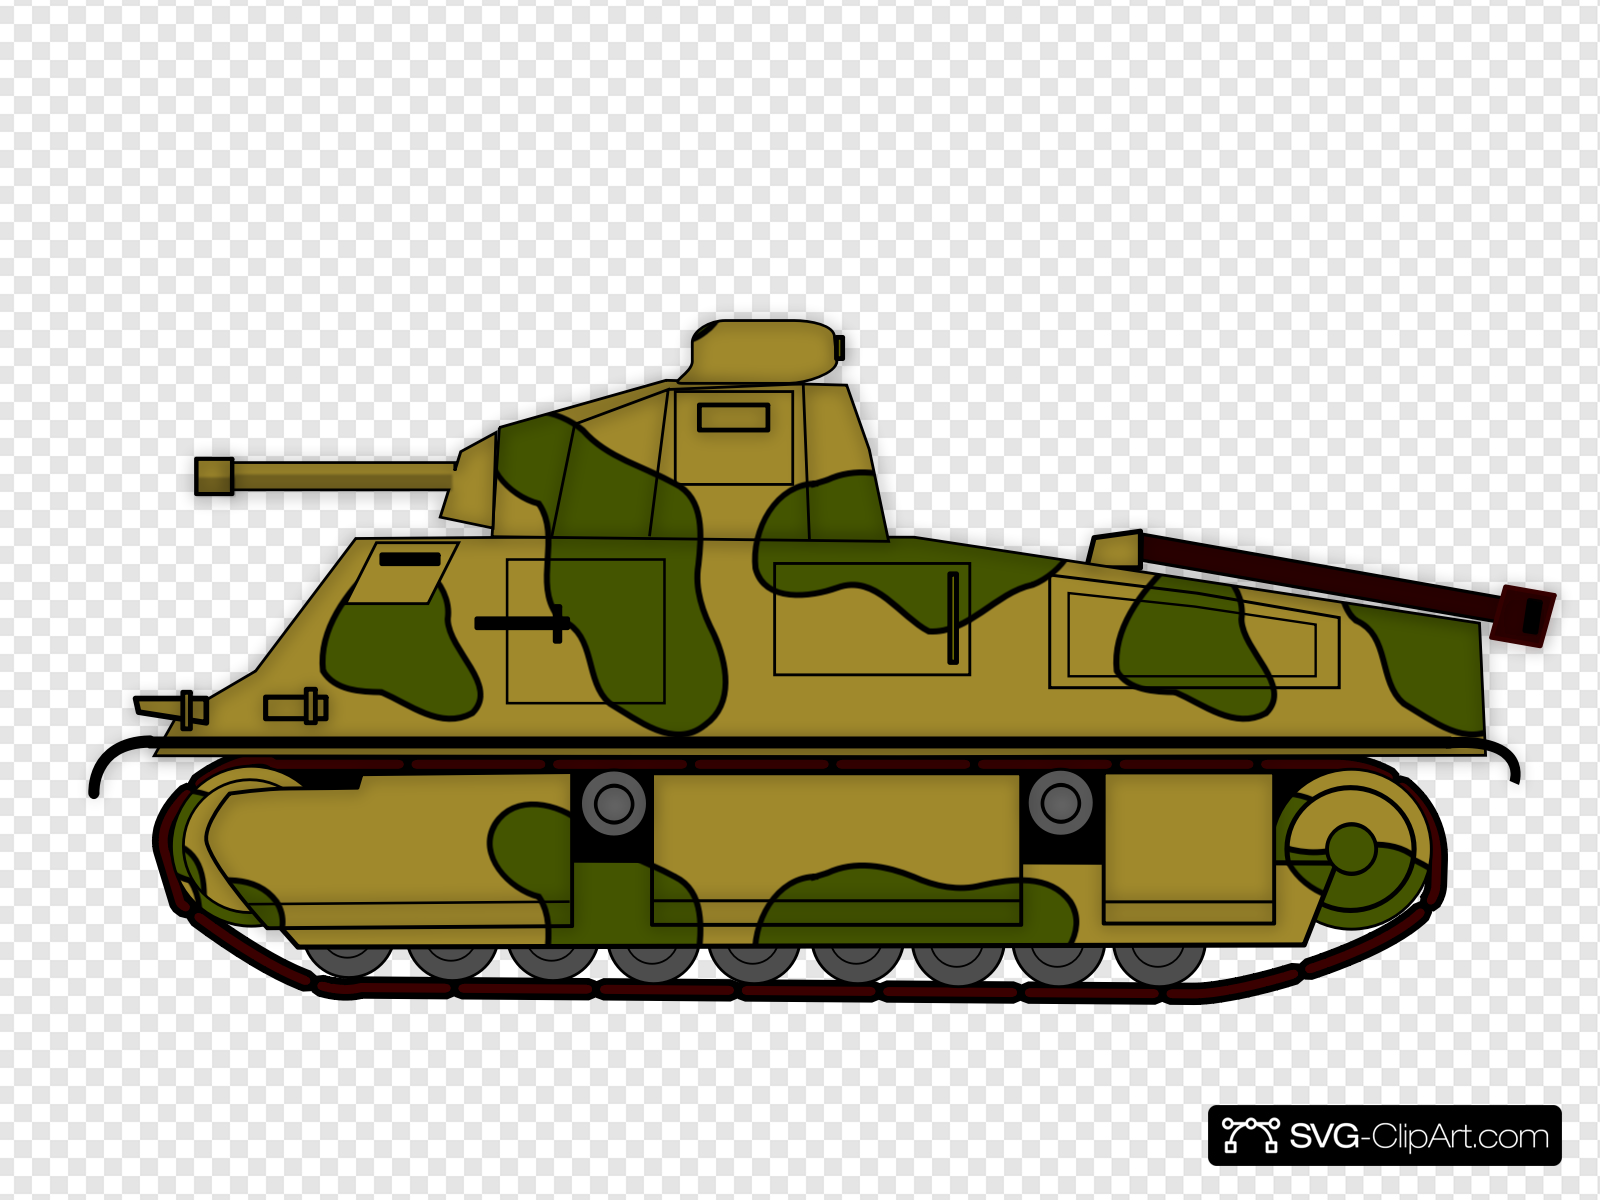 Army Tank Clip art, Icon and SVG